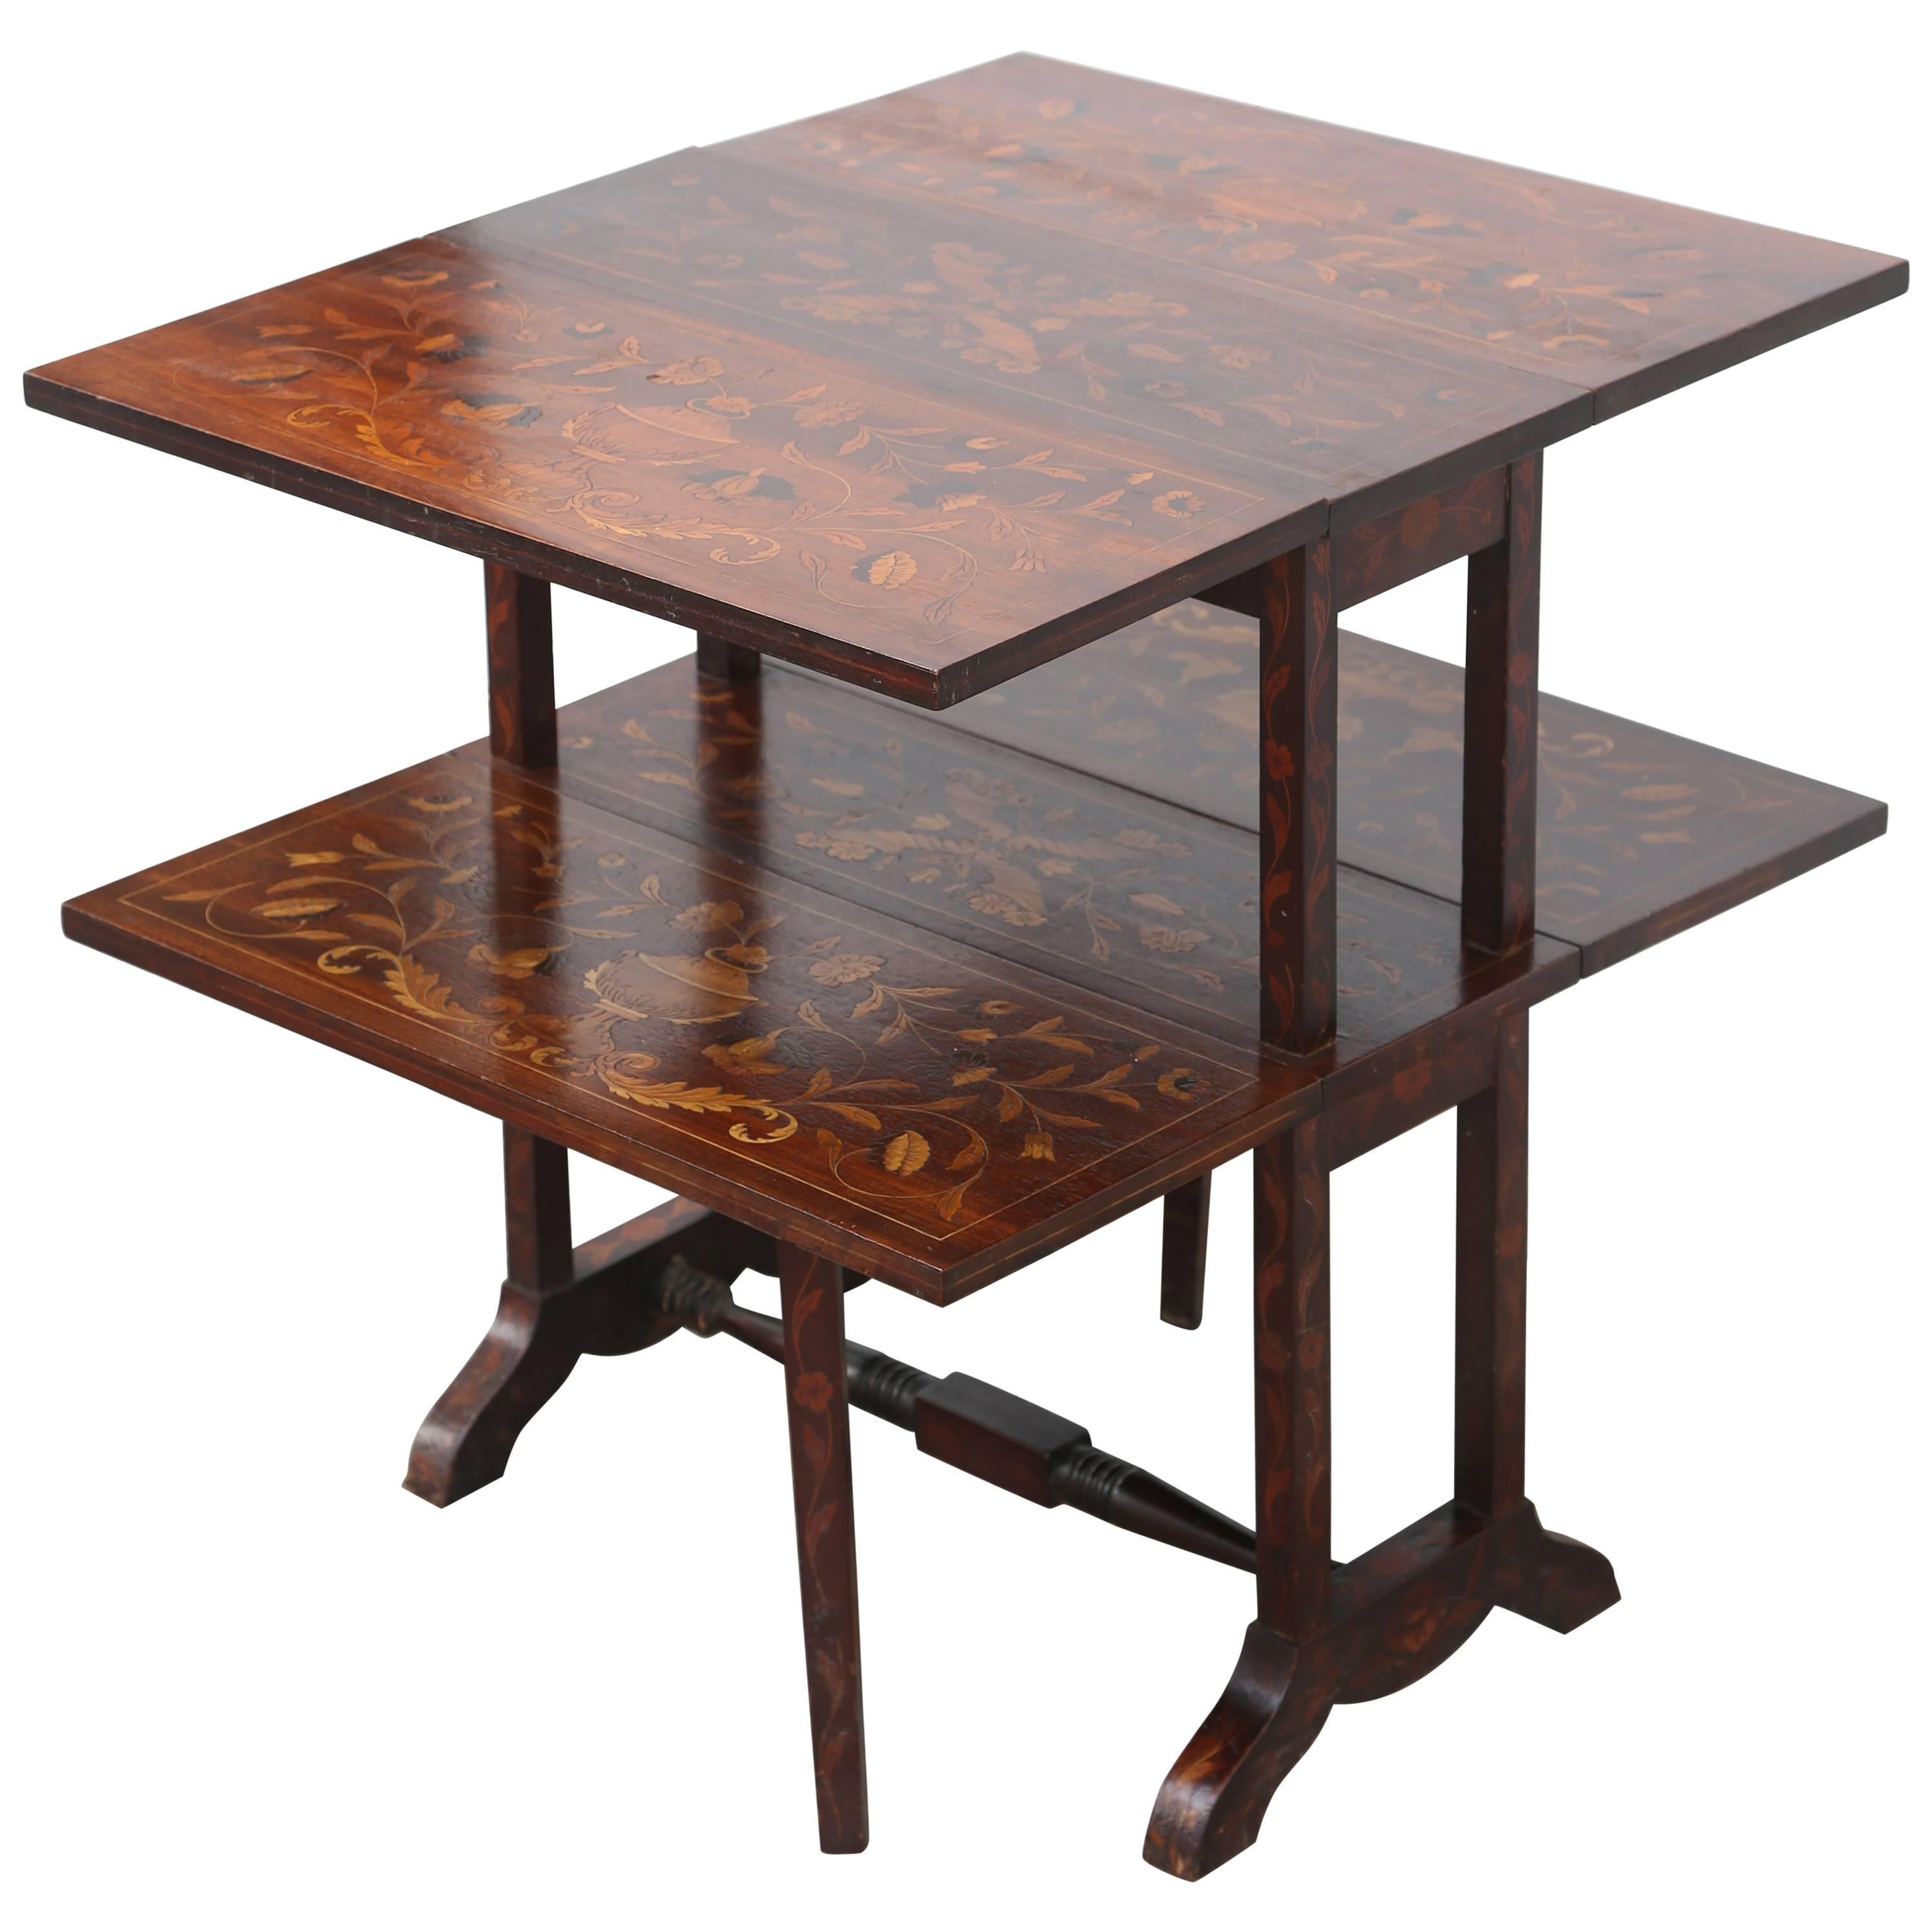 19th Century Drop-Leaf Table with Dutch Marketry Inlay 